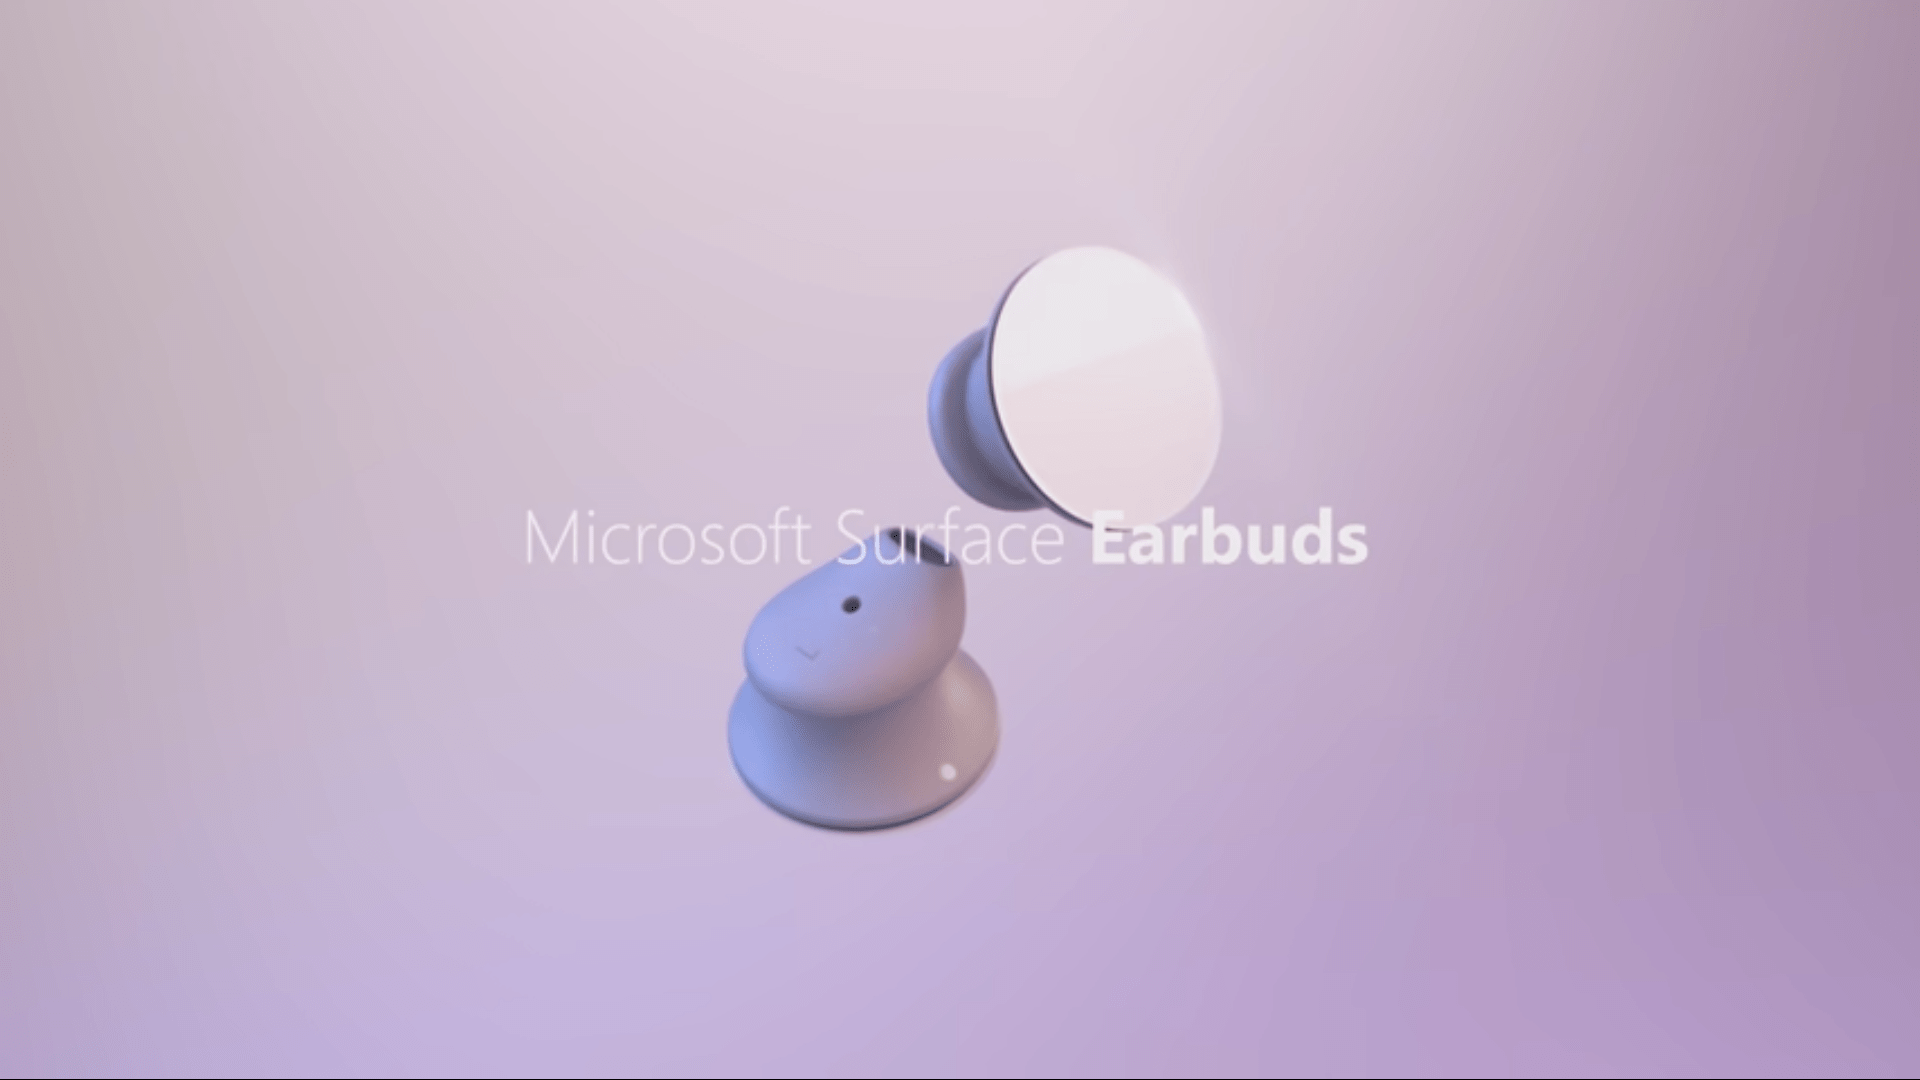 Surface EarBuds vs AirPods: Which earbuds should you get?